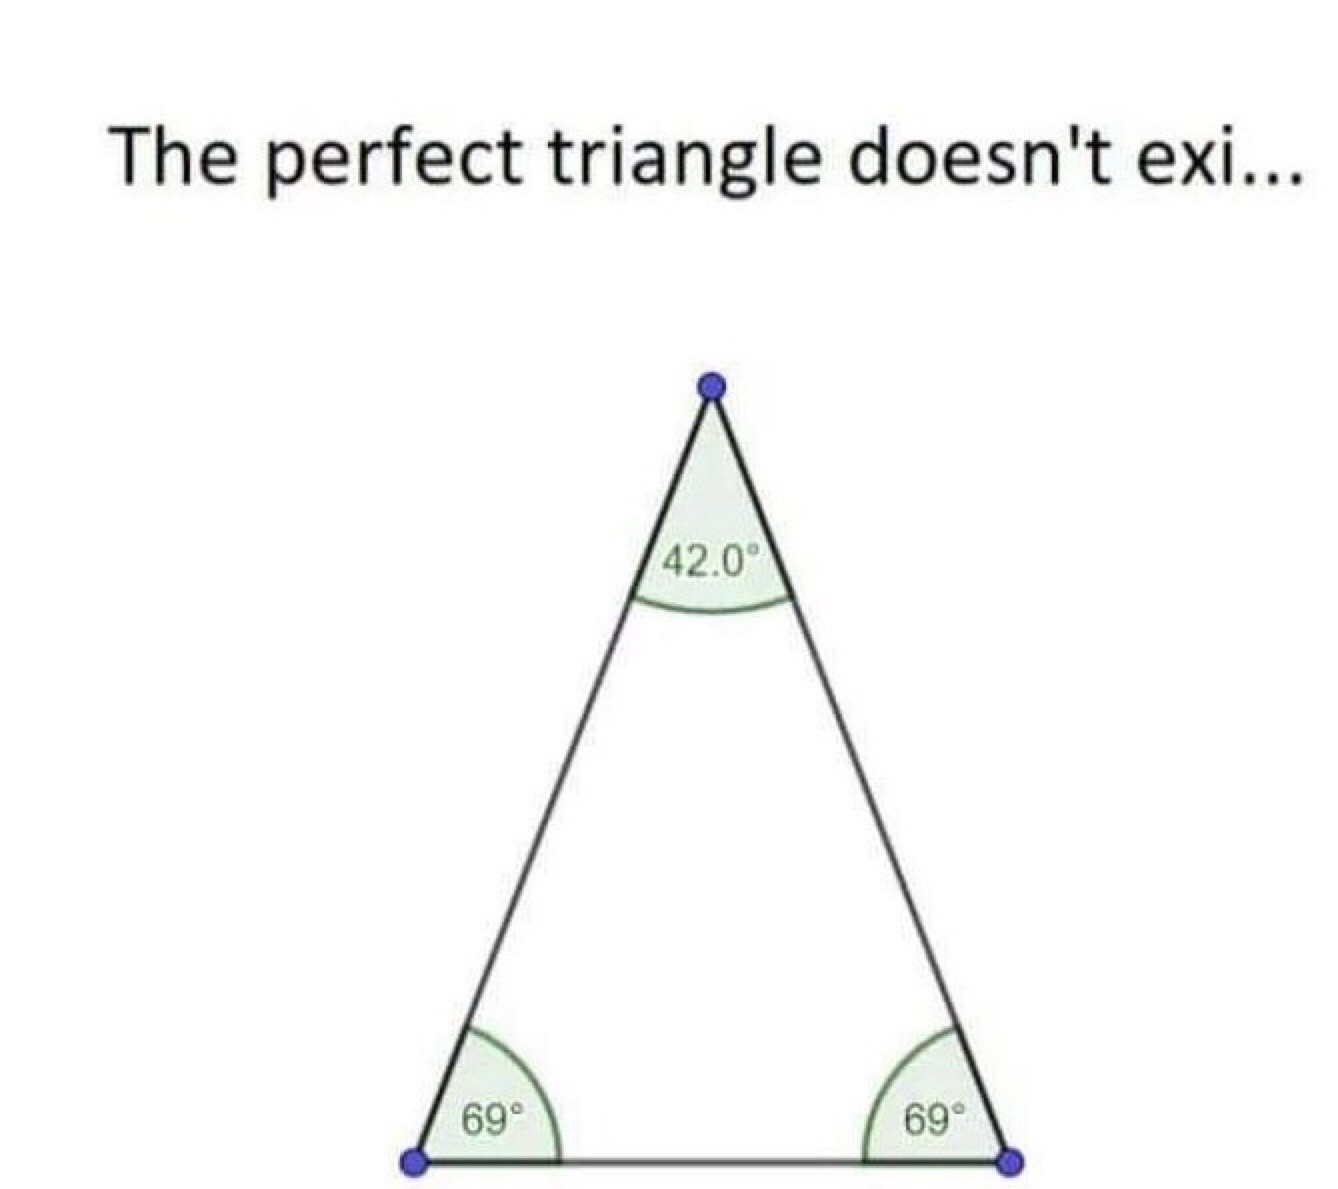 imagine schools - The perfect triangle doesn't exi... 42.0 69 69